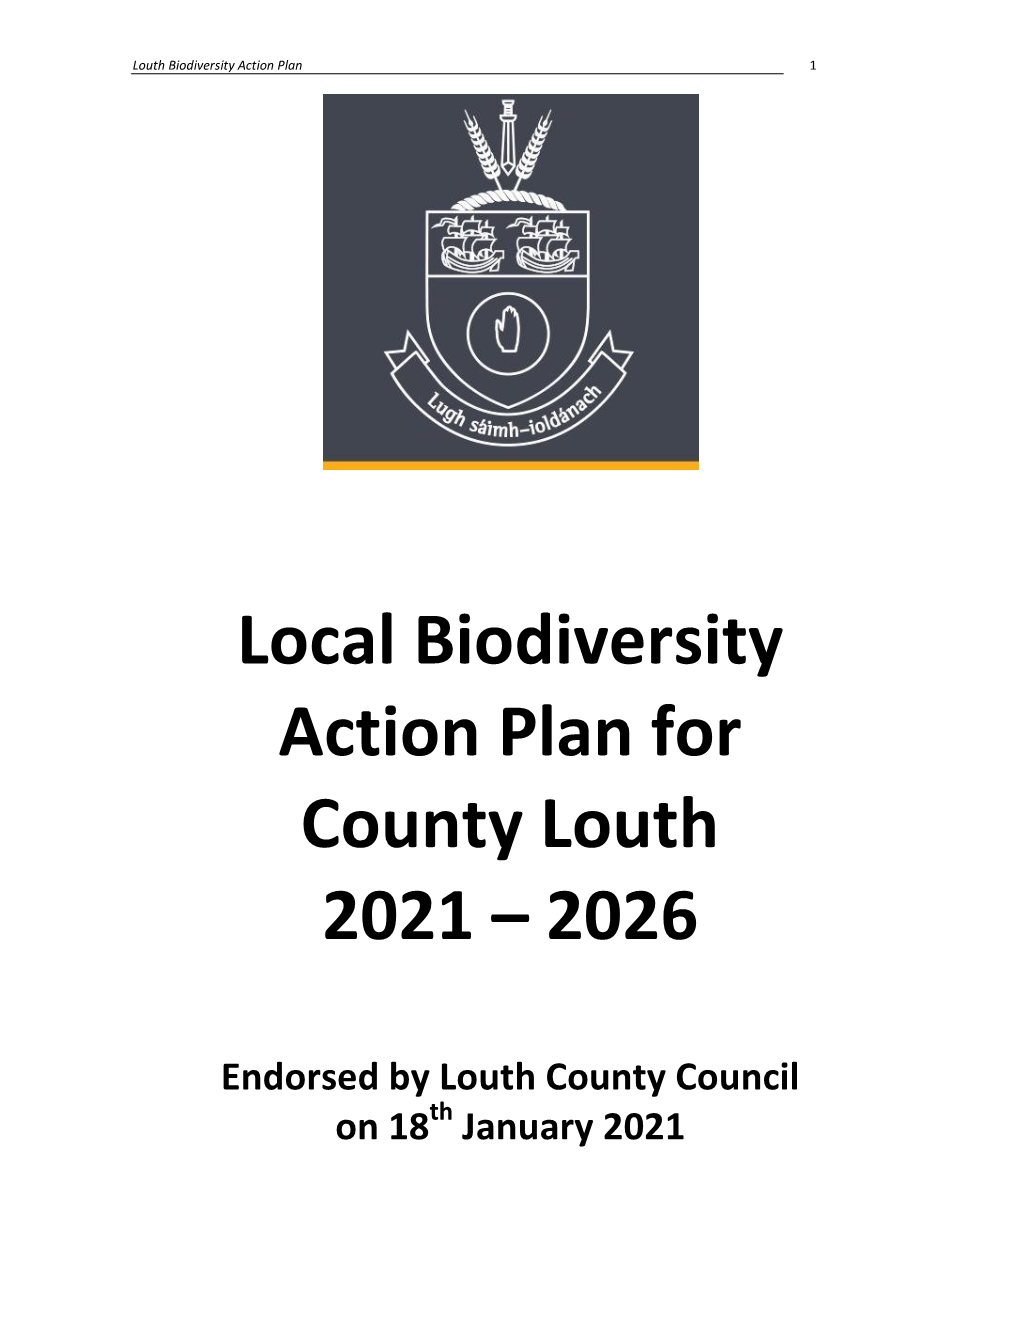 Local Biodiversity Action Plan for County Louth 2021 – 2026